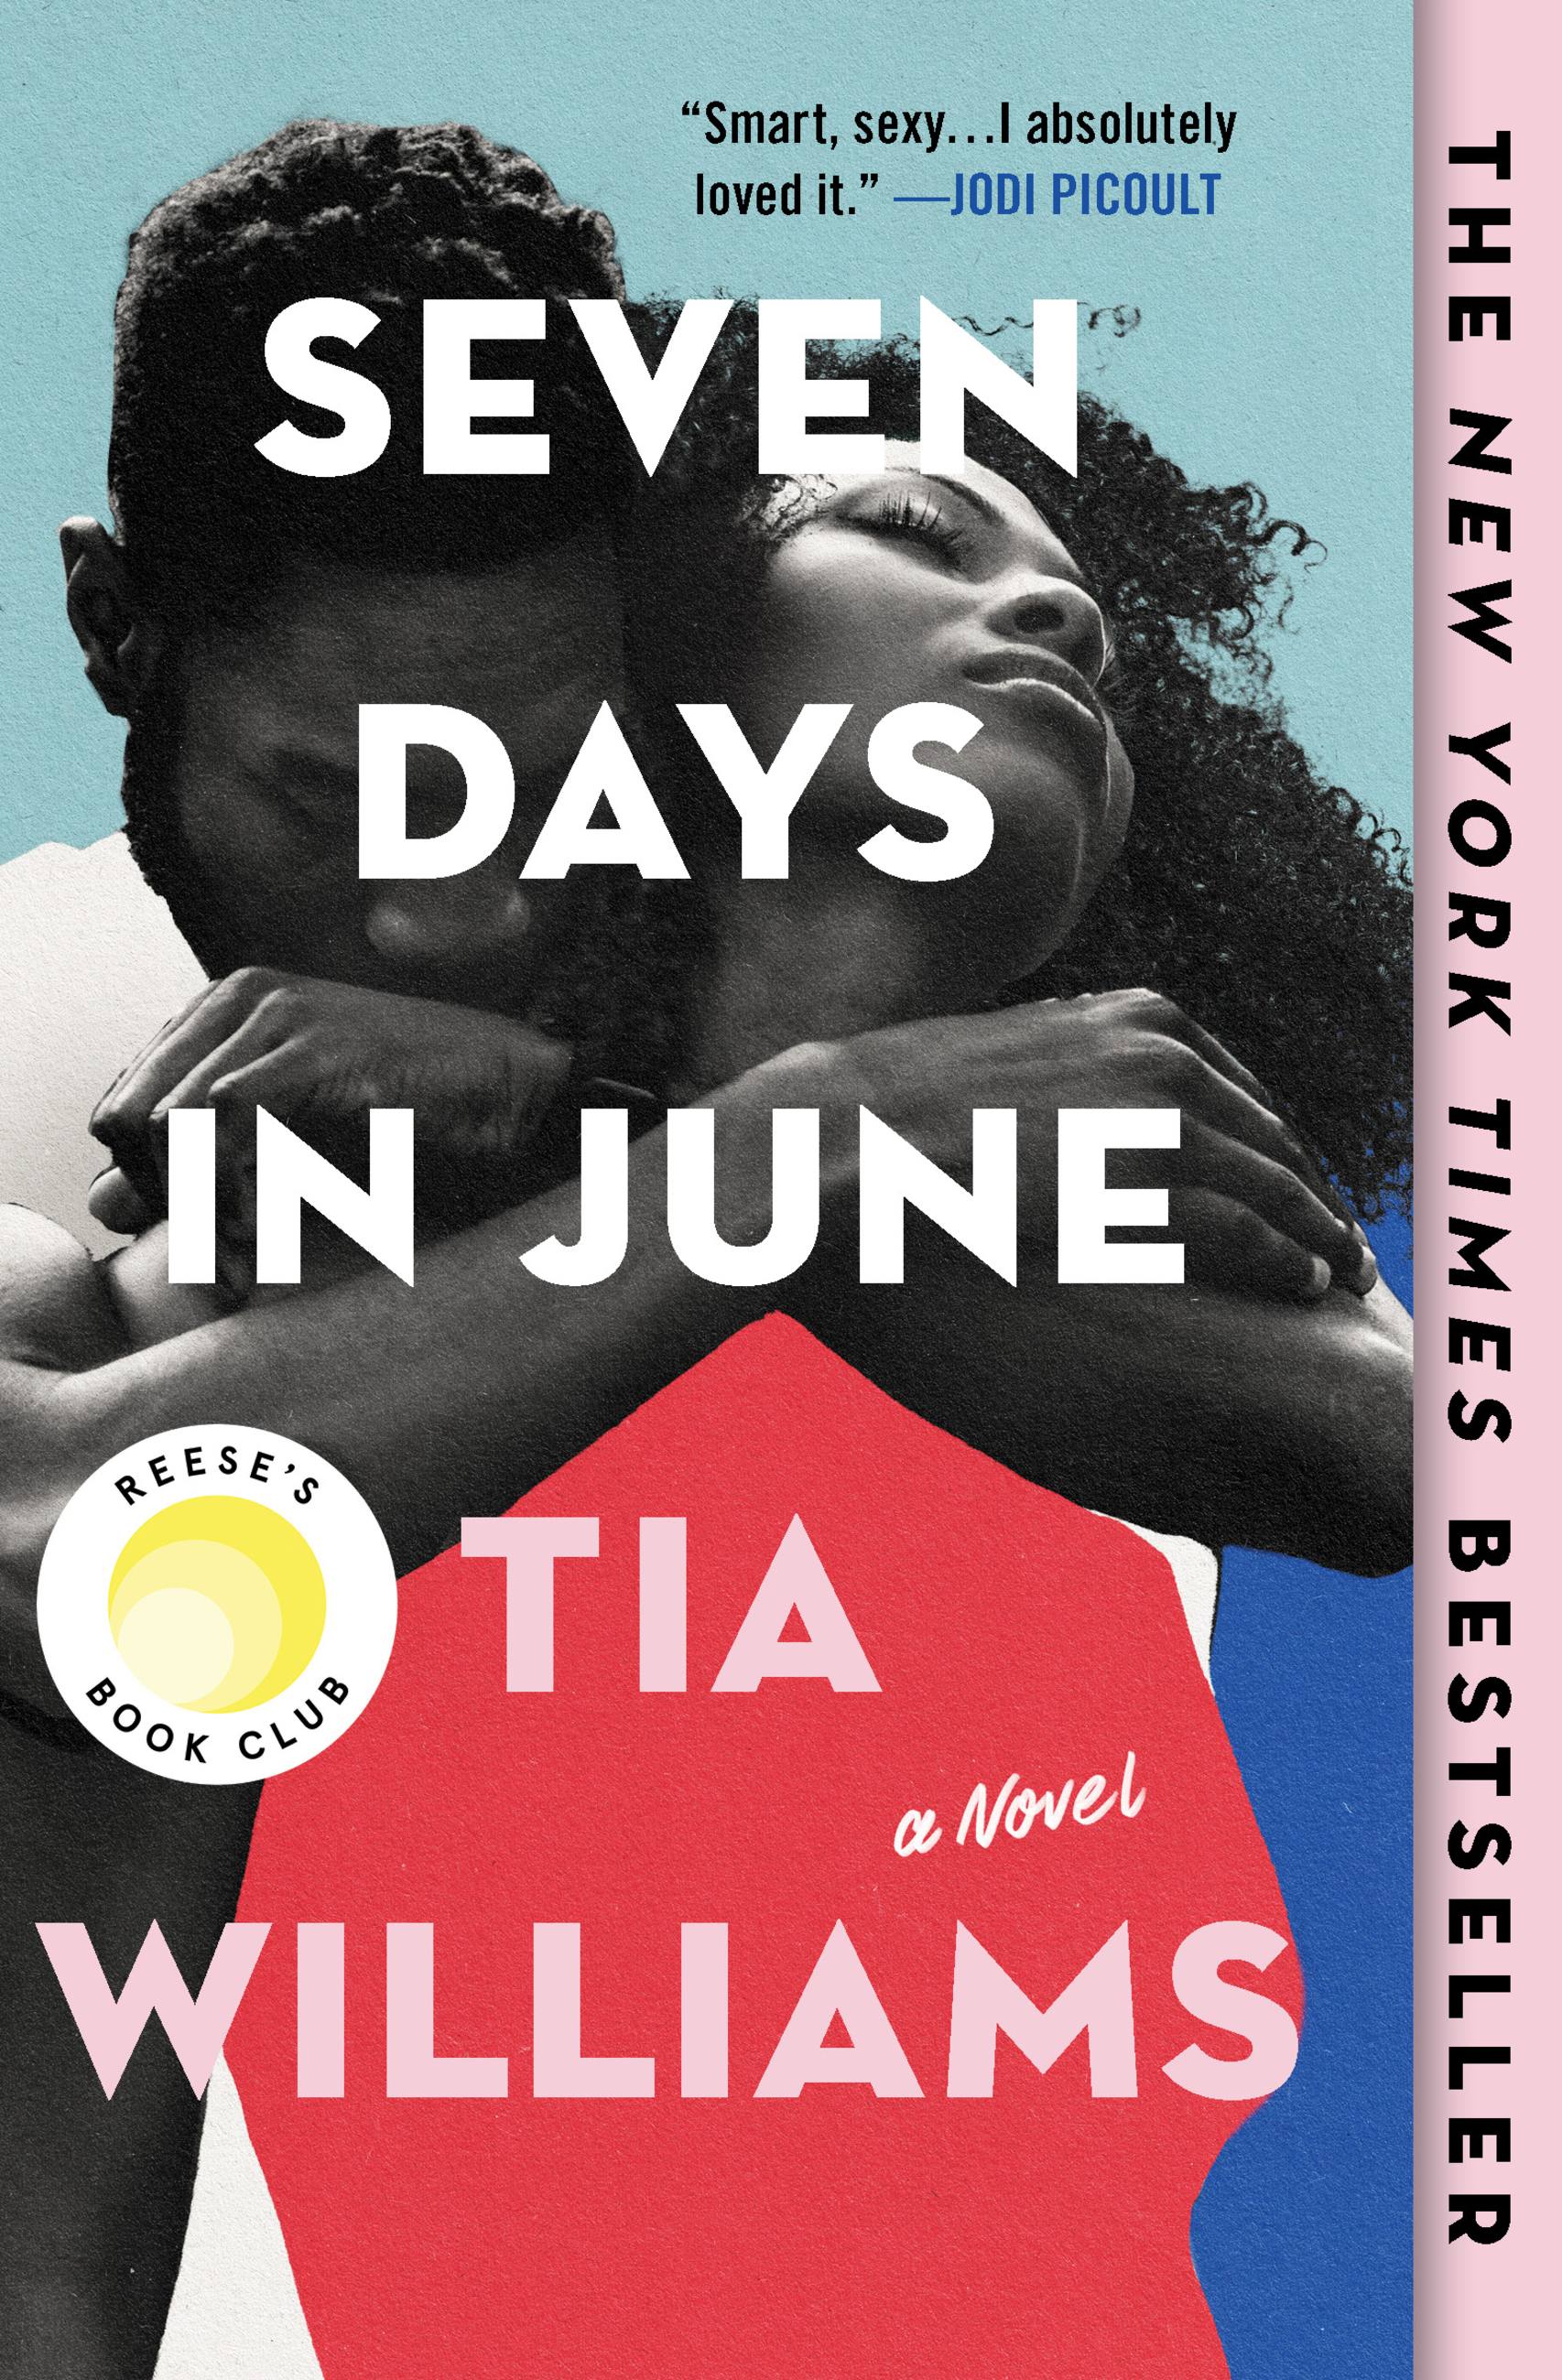 Small Petite Blonde - Seven Days in June by Tia Williams | Hachette Book Group